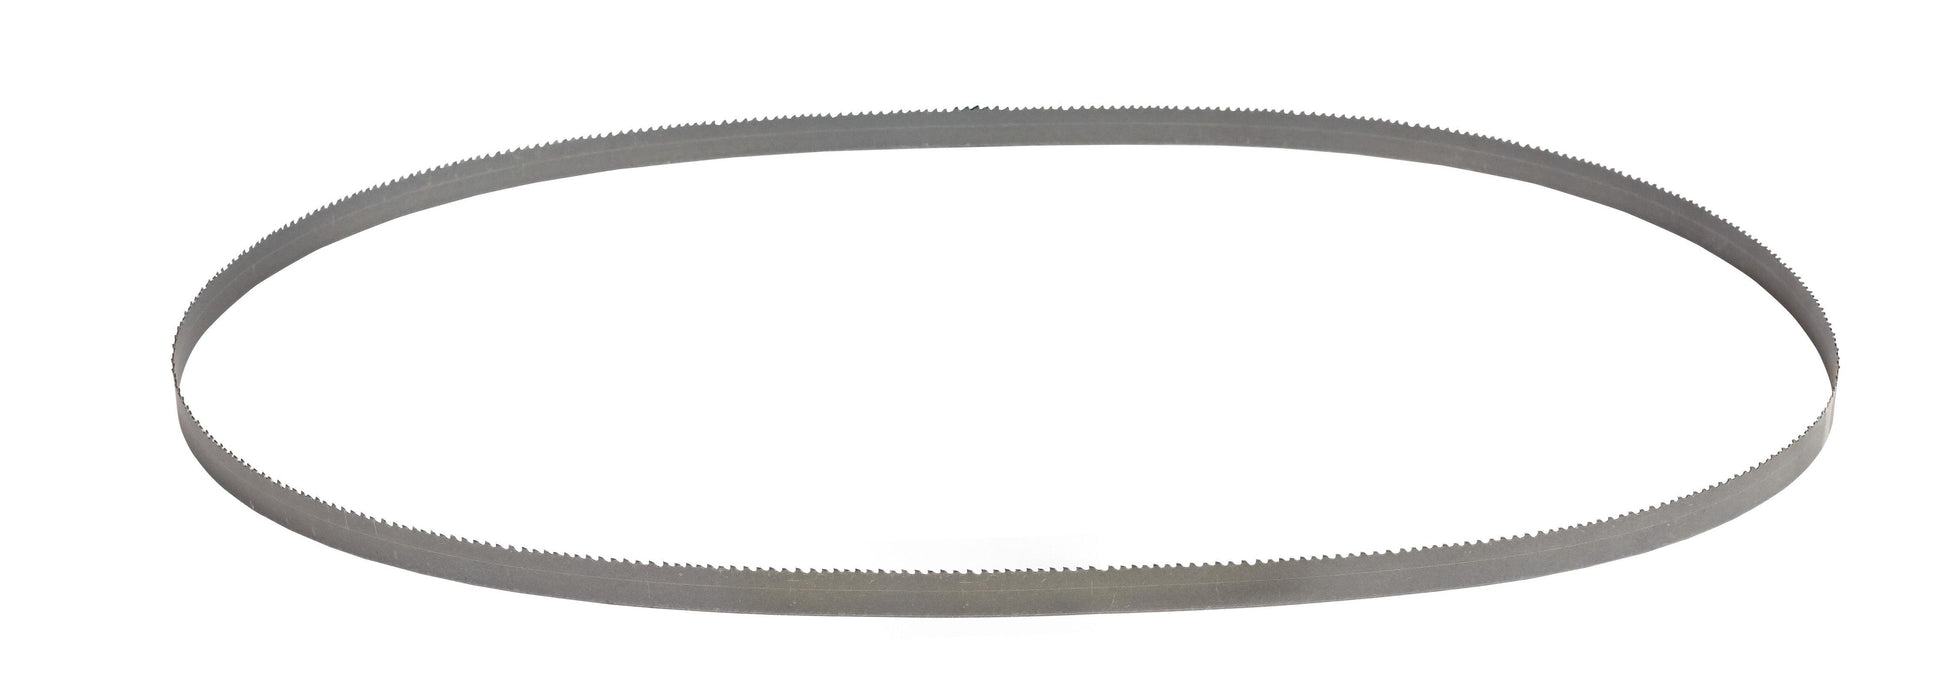 Milwaukee 18 TPI Compact Portable Band Saw Blade (3 Pack), Model 48-39-0572 - Orka